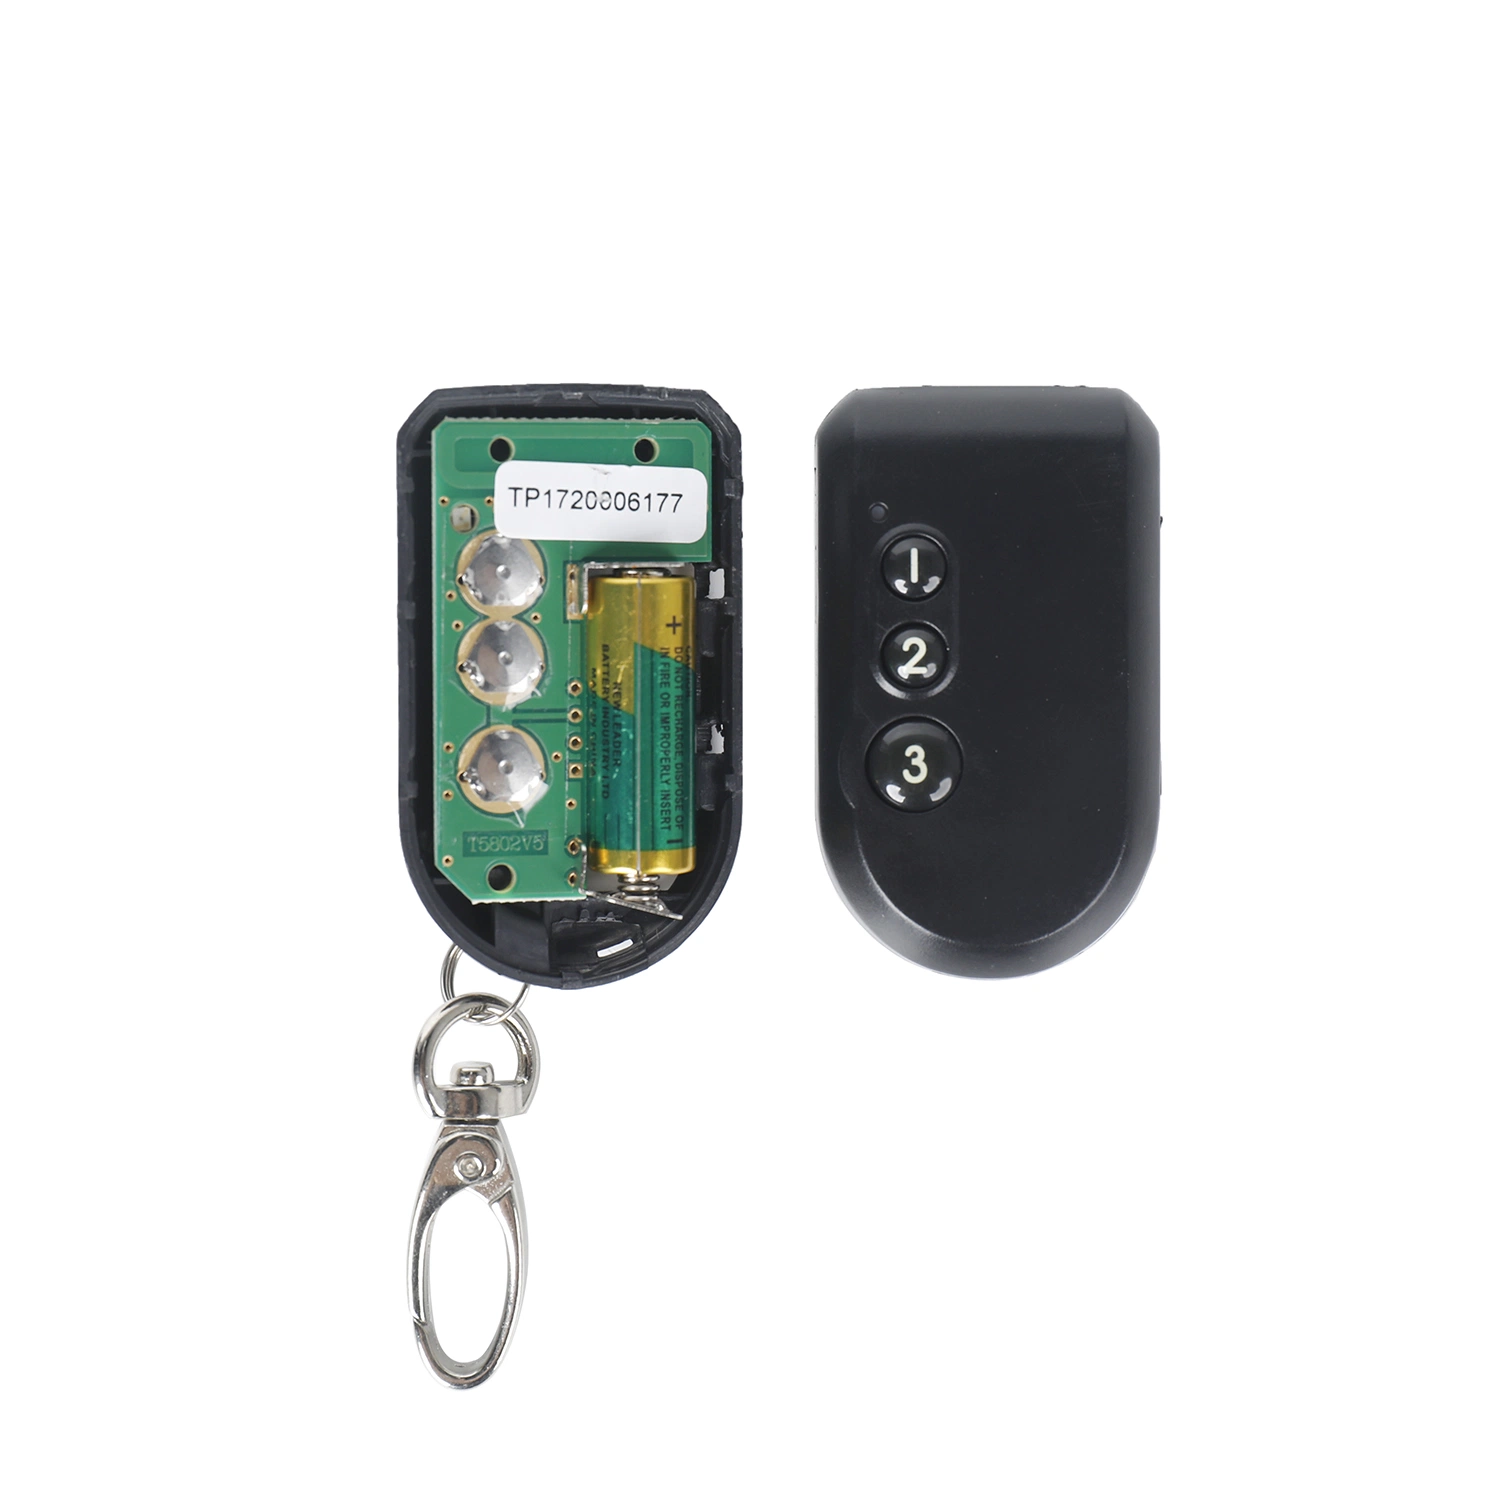 Hiland Wireless Rolling Code Remote Control and Transmitter T5802 for Garage Door